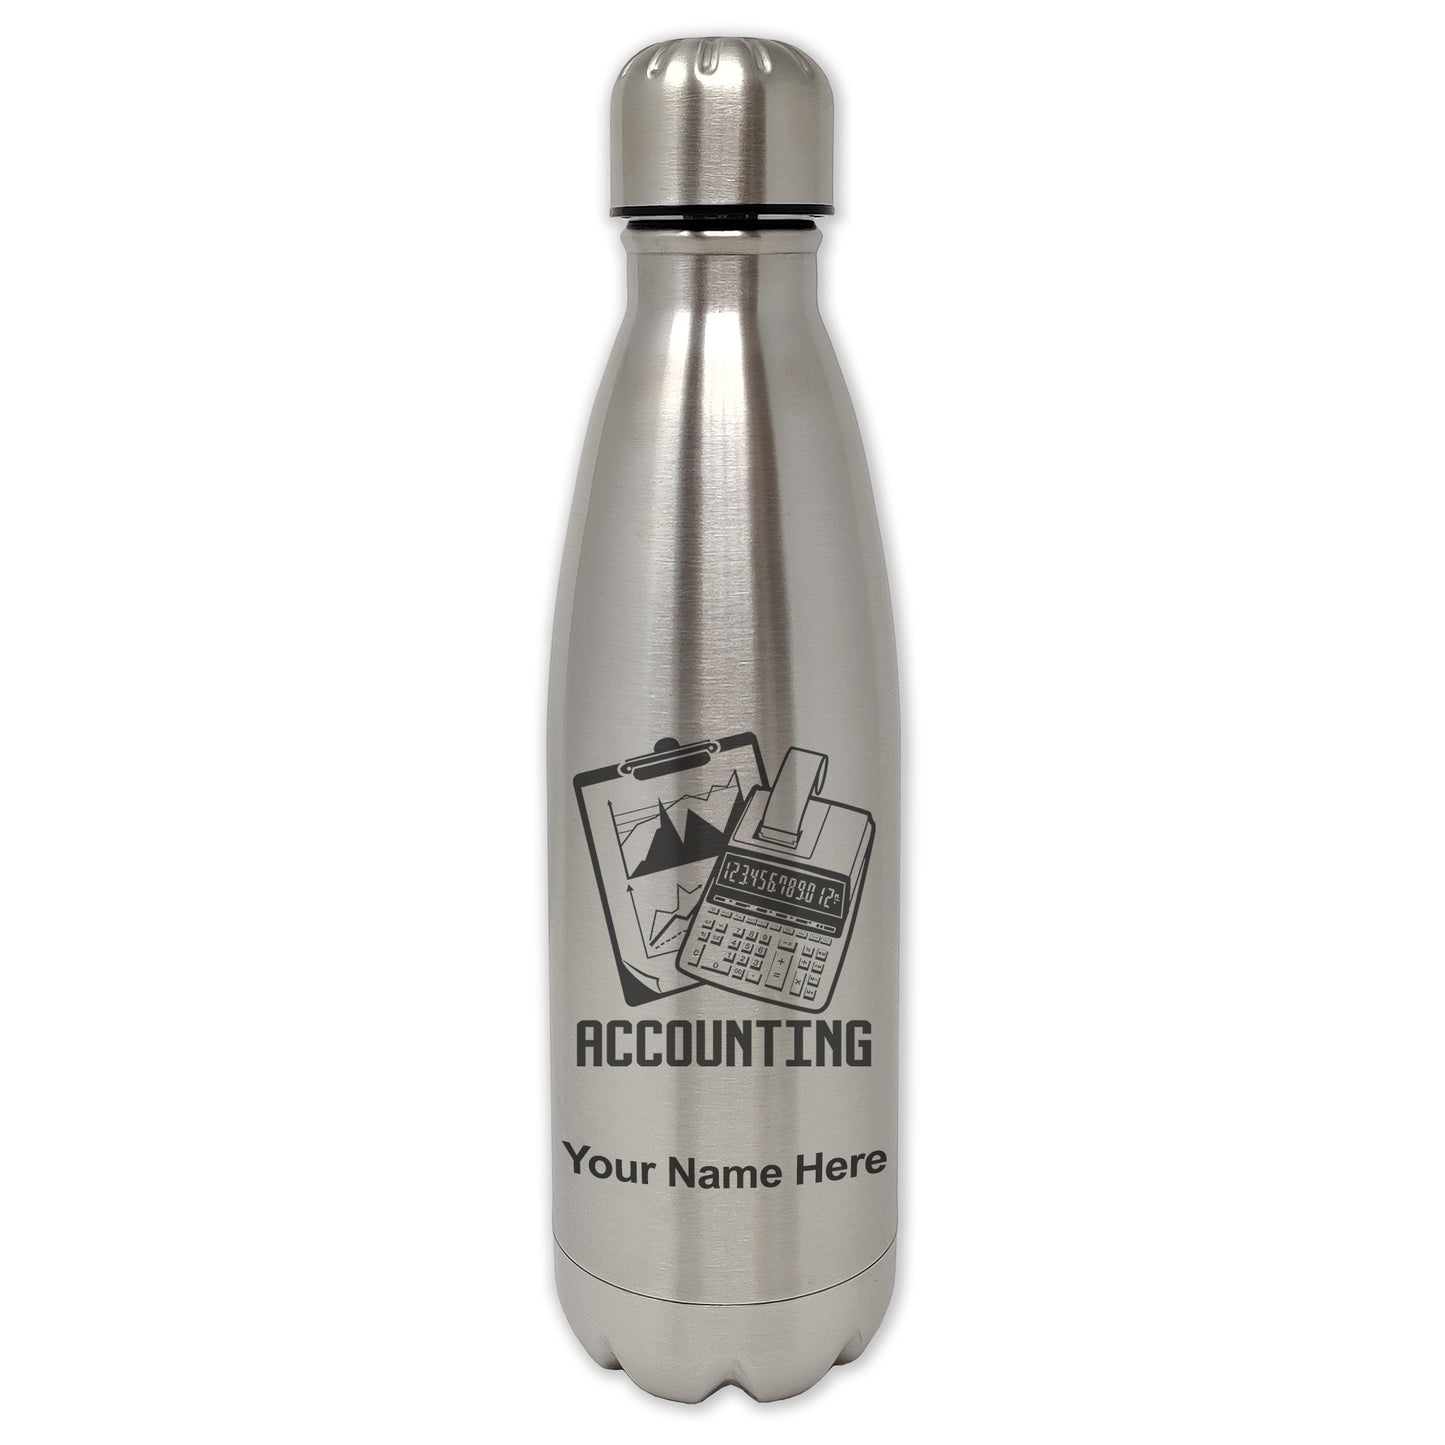 LaserGram Single Wall Water Bottle, Accounting, Personalized Engraving Included - LaserGram Custom Engraved Gifts